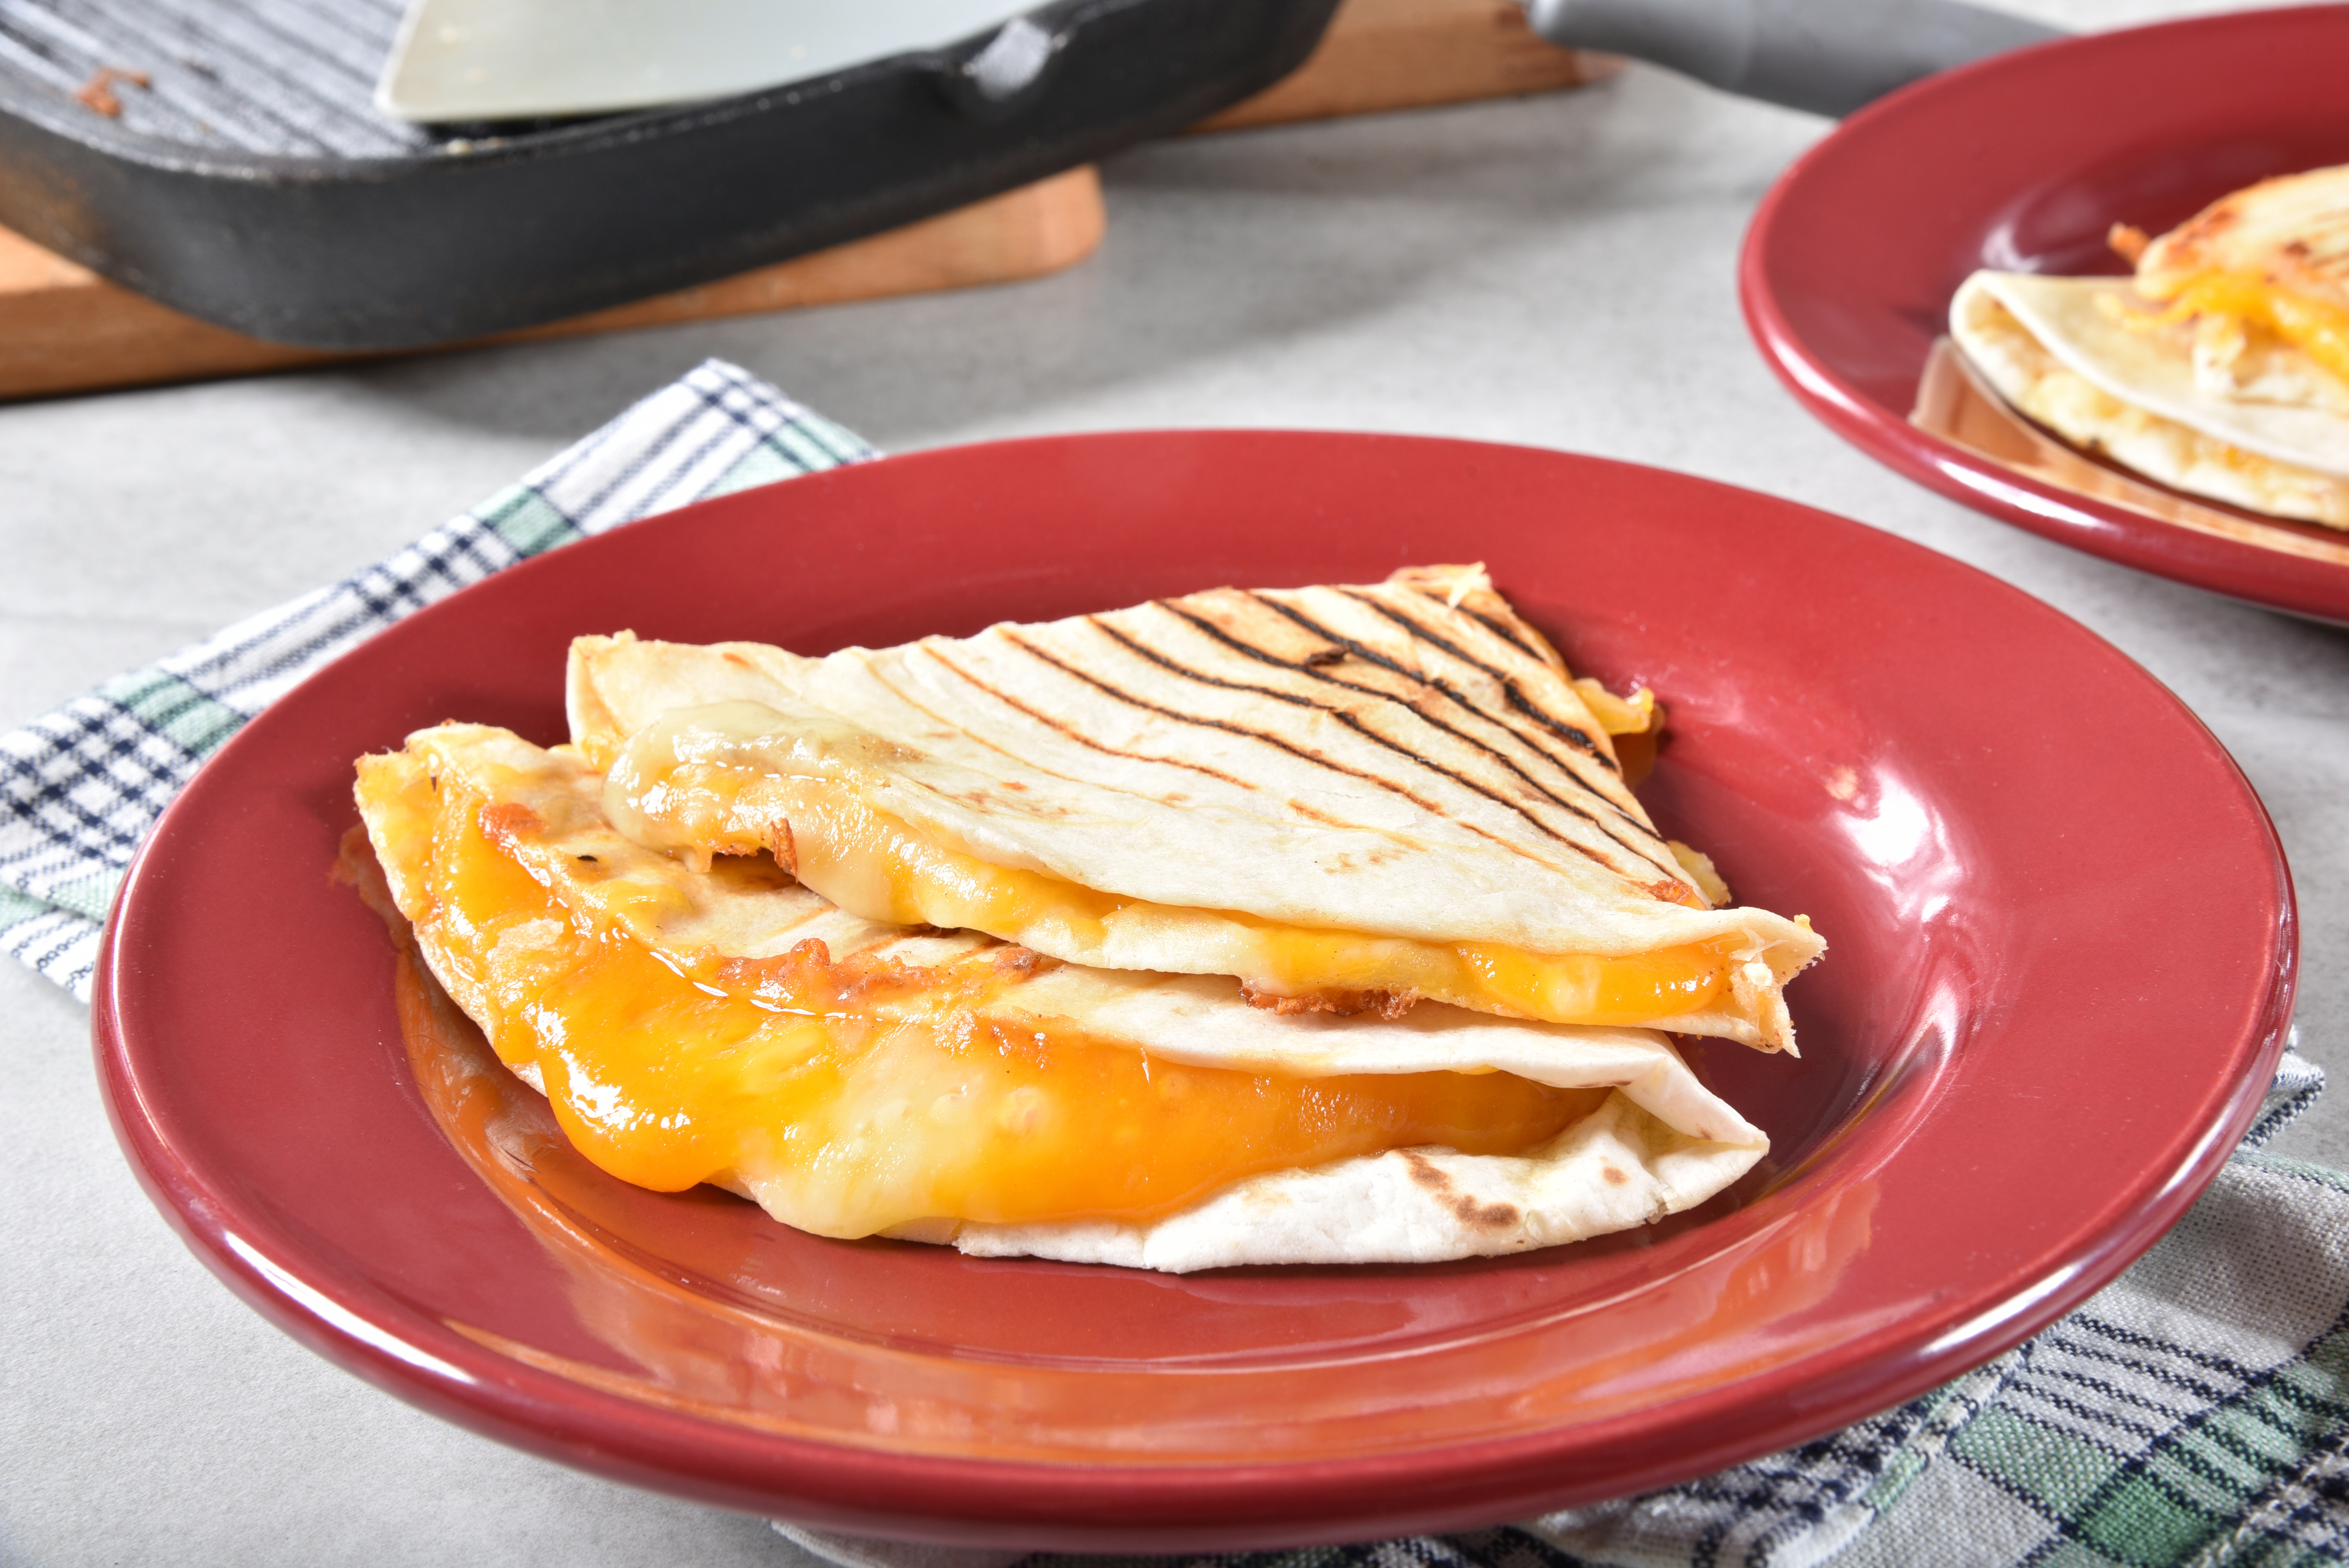 Grilled quesadilla with melted cheese on a red plate